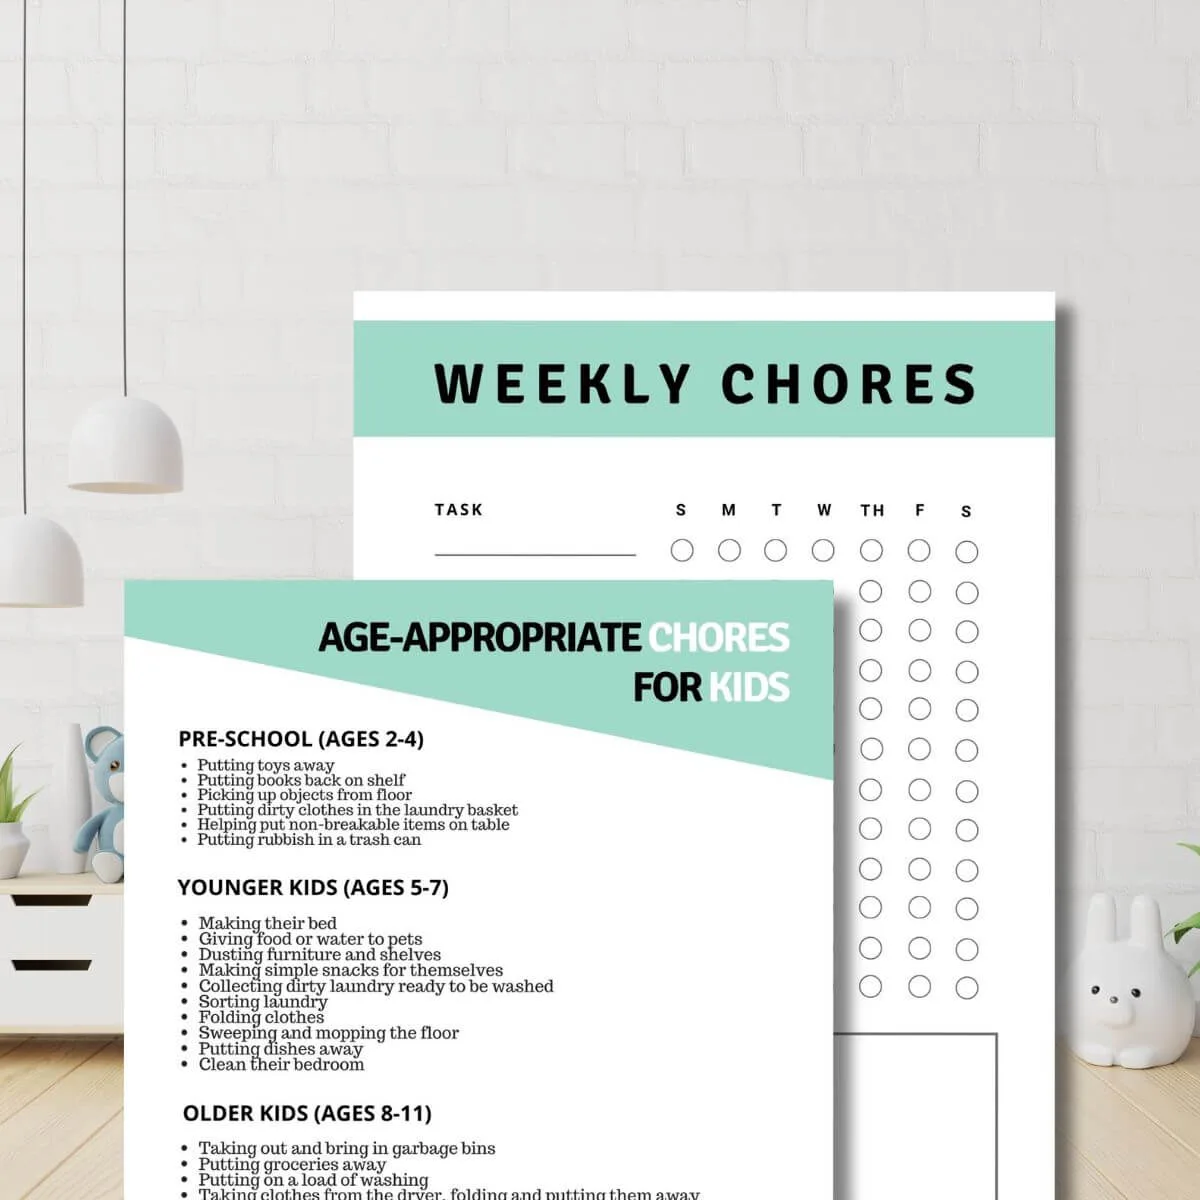 Printable chores list and chore chart for kids.